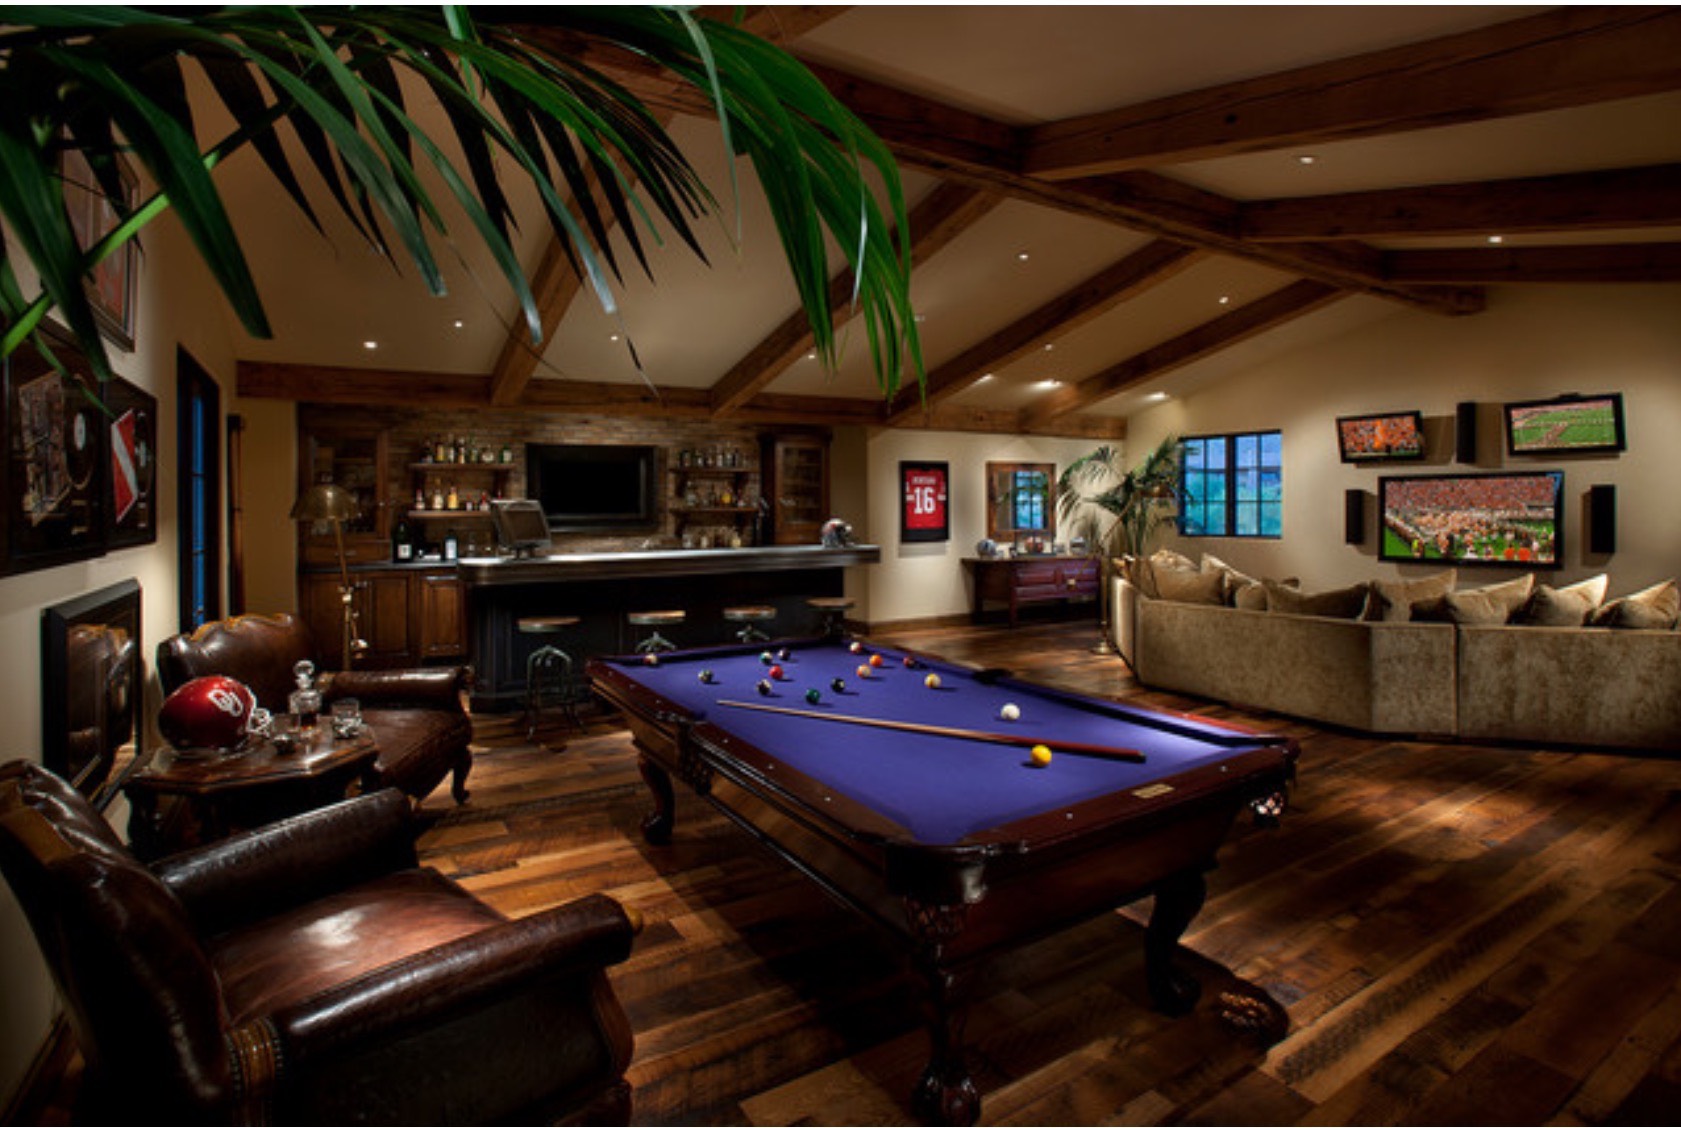 Game Room with Billiards and Arcade Machines